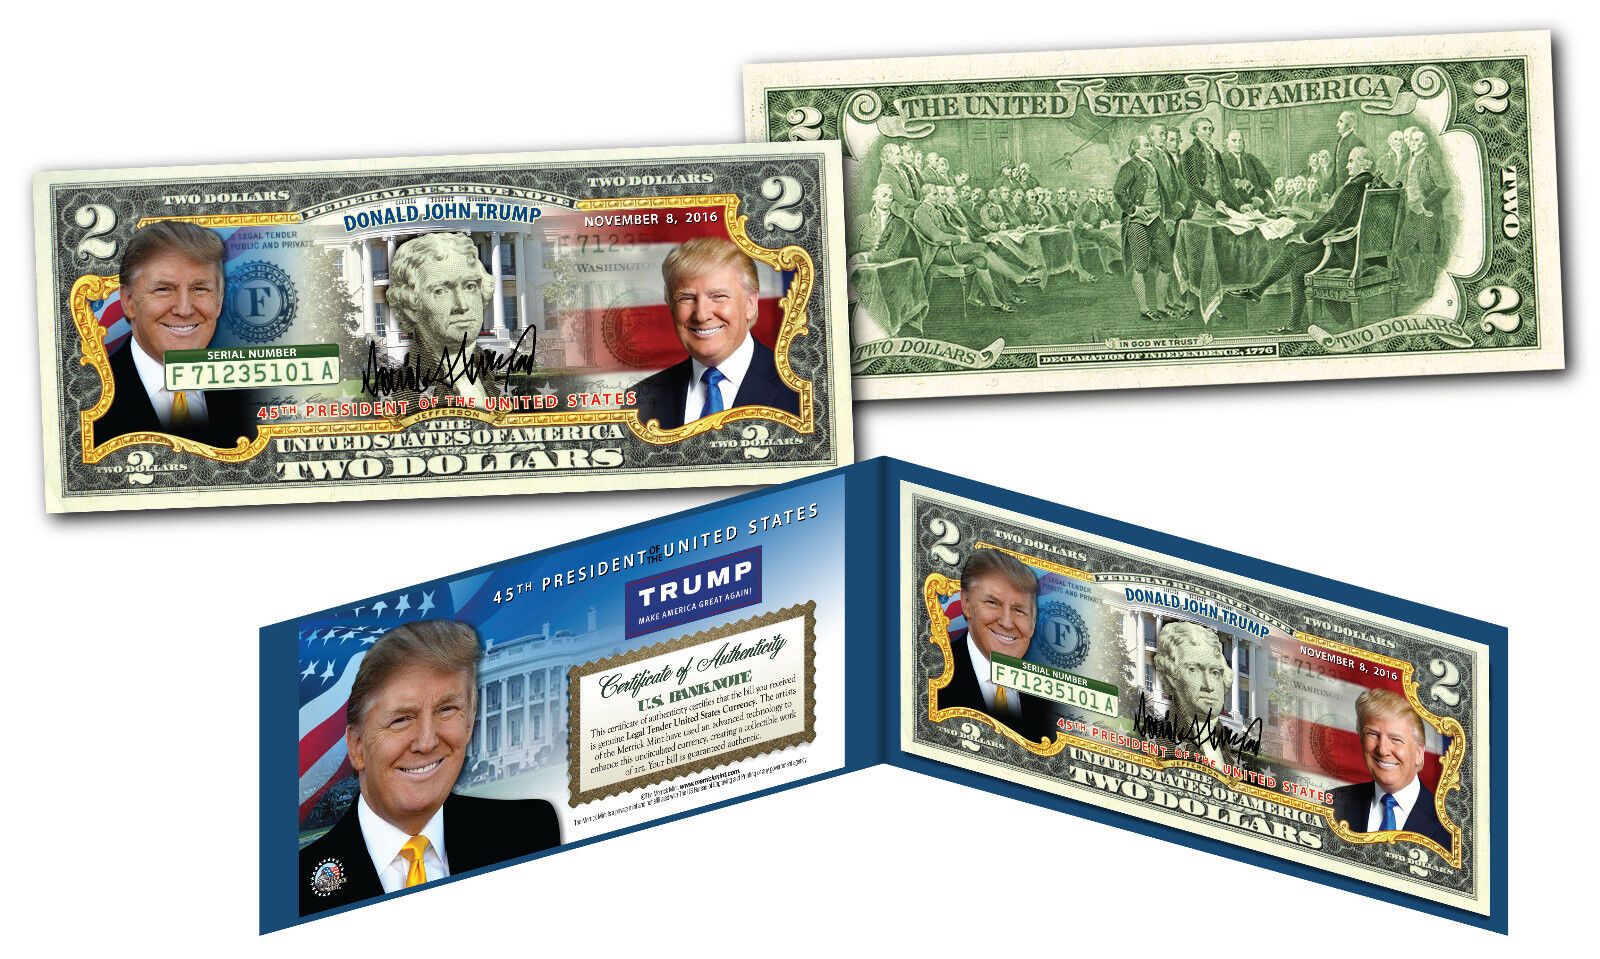 DONALD TRUMP 45th President of United States Official Legal Tender U.S. $2 Bill